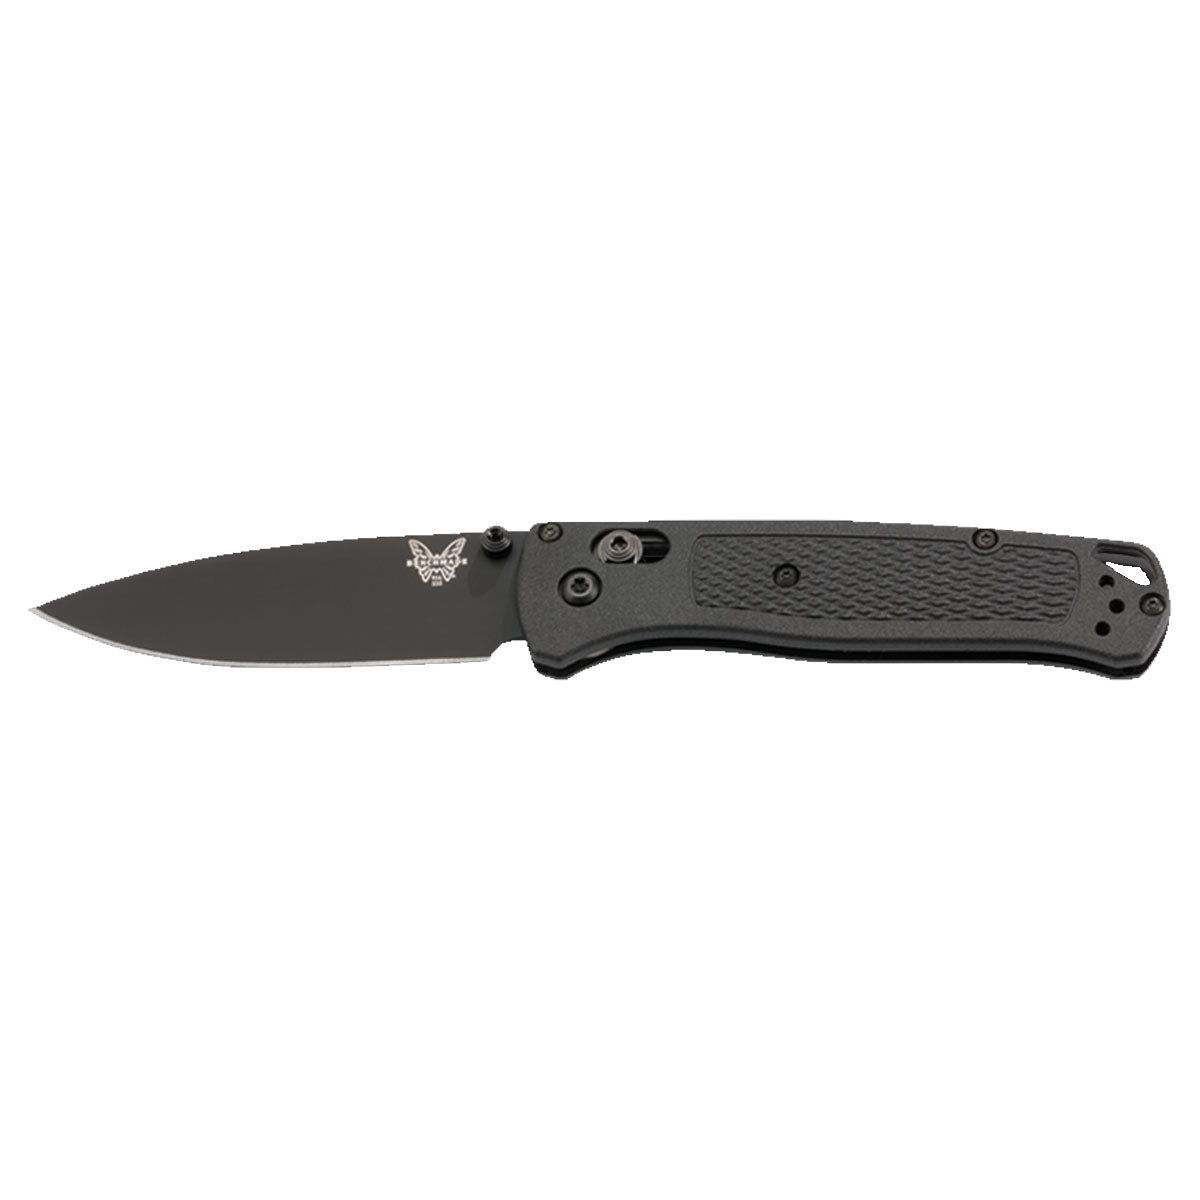 Benchmade 535 Bugout in  by GOHUNT | Benchmade - GOHUNT Shop